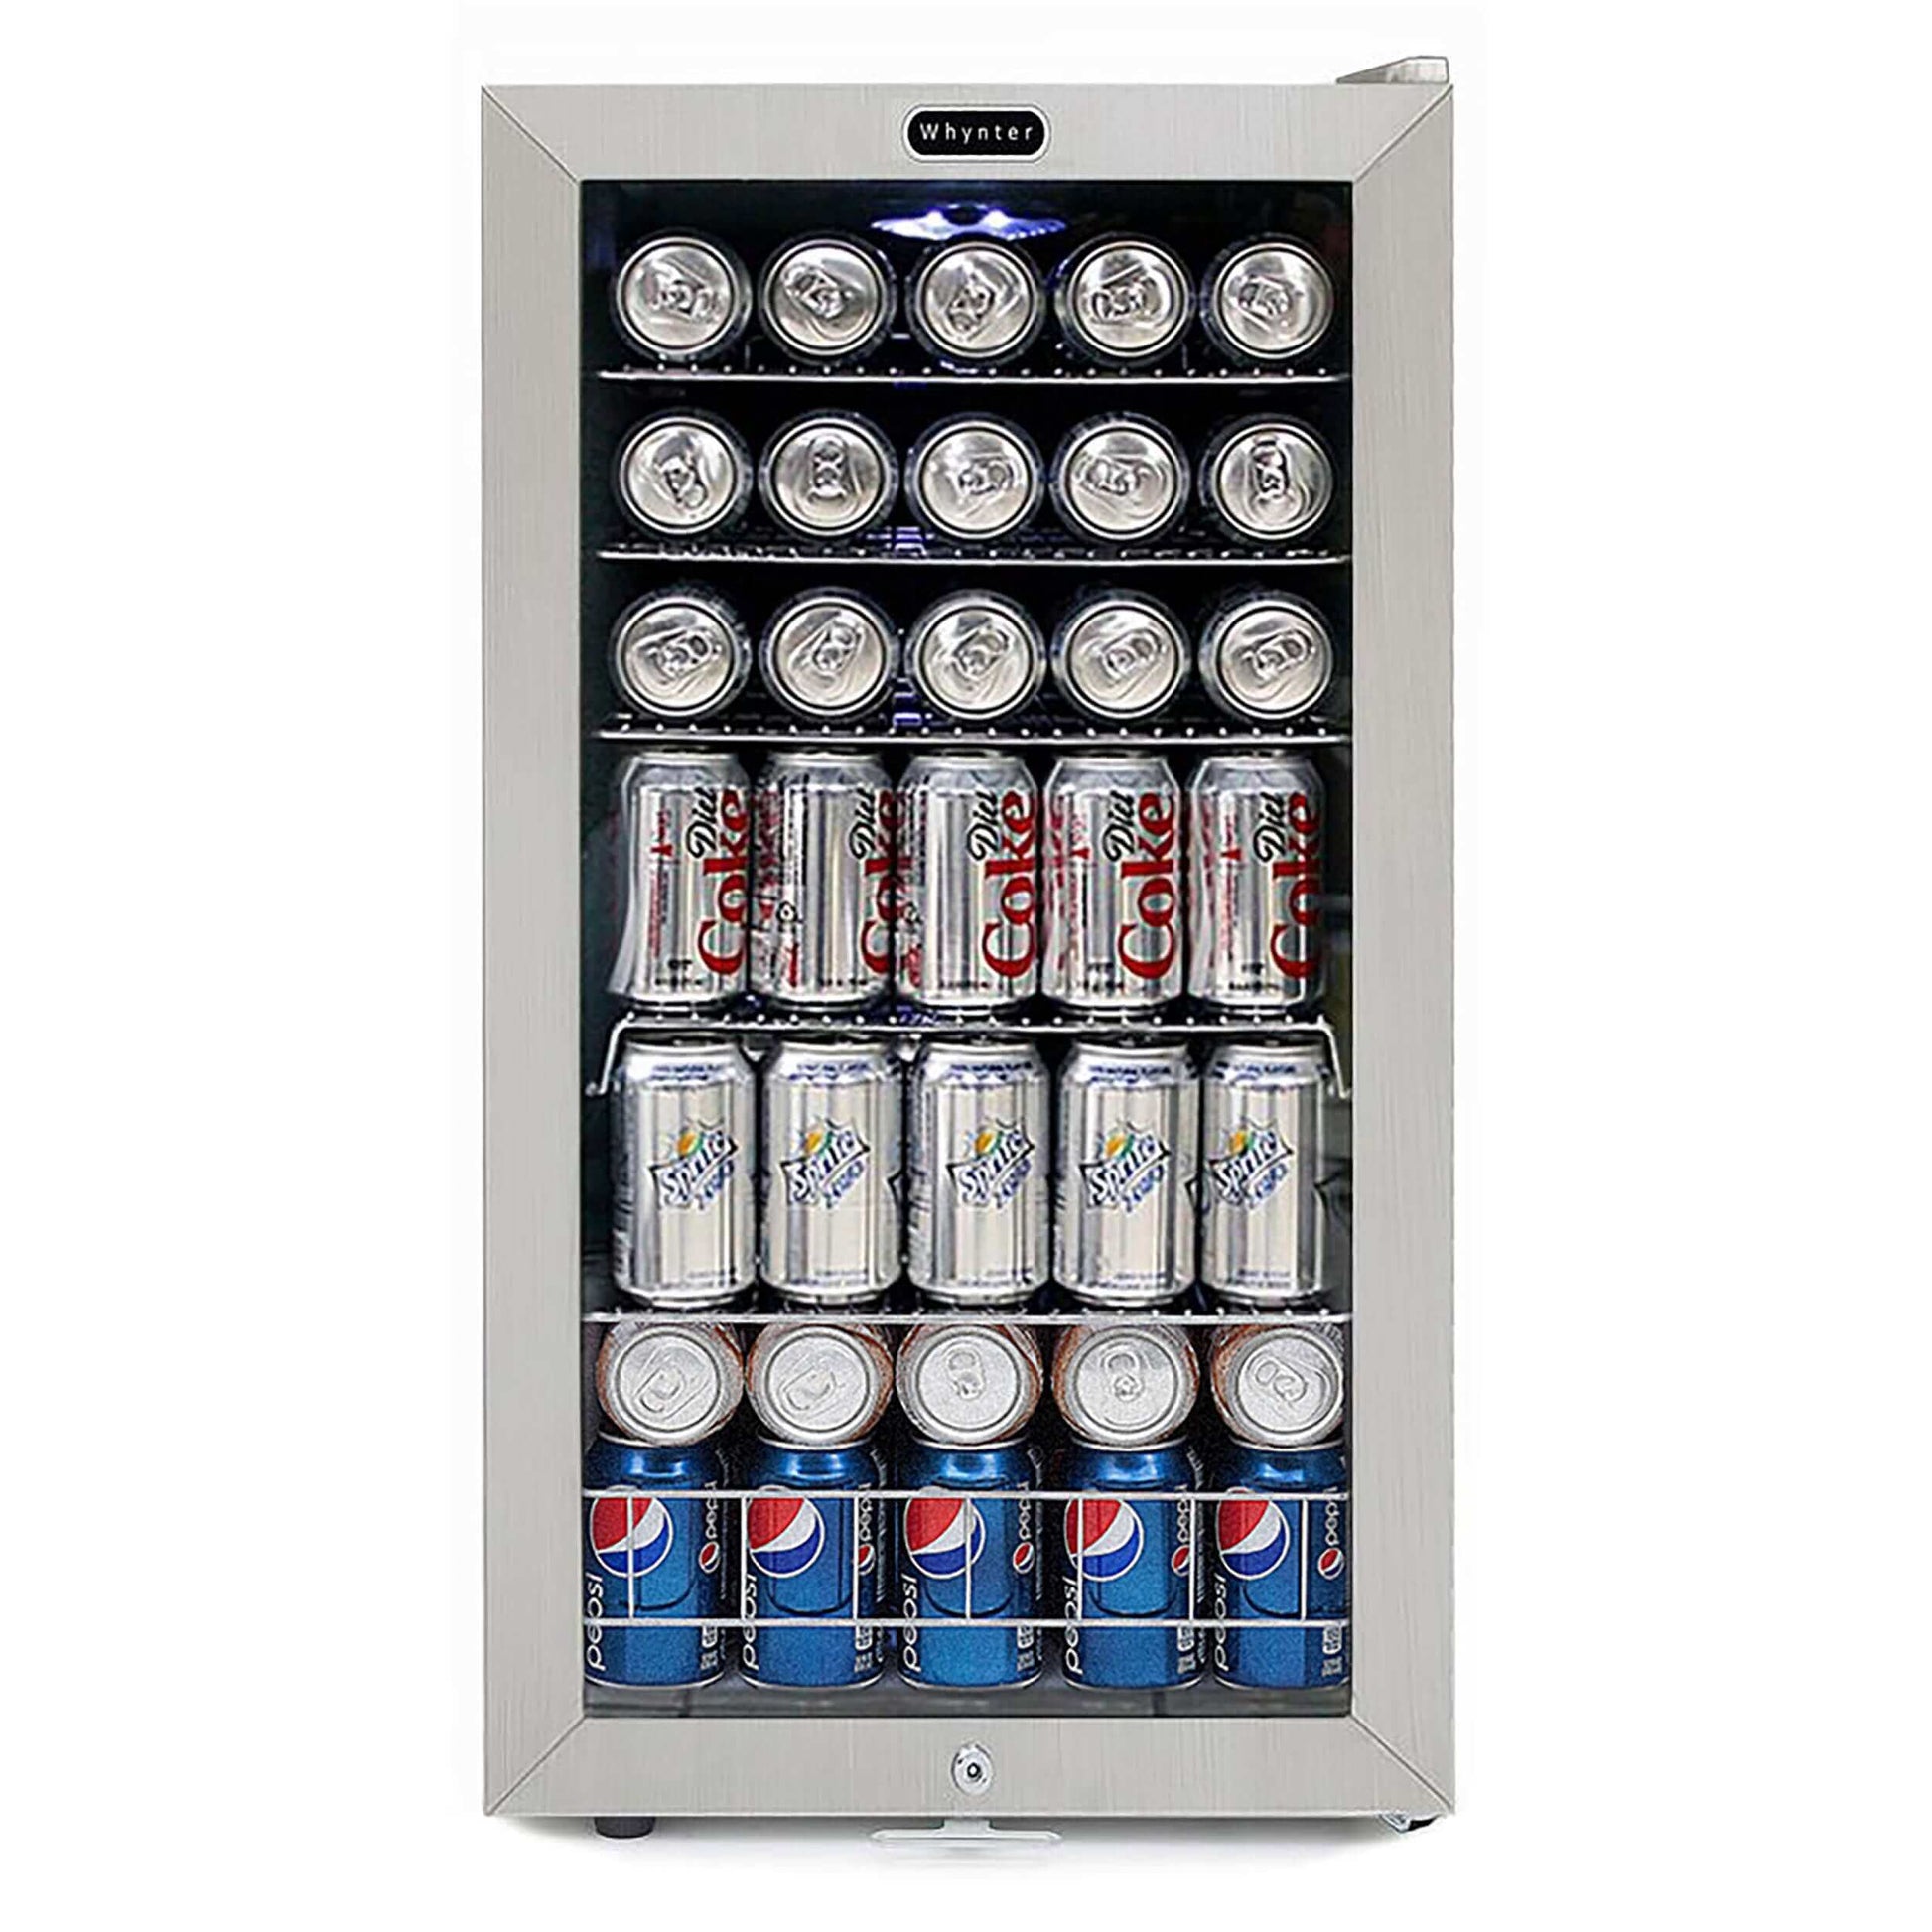 Whynter BR-128WS Beverage Refrigerator With Lock – Stainless Steel 120-Can Capacity